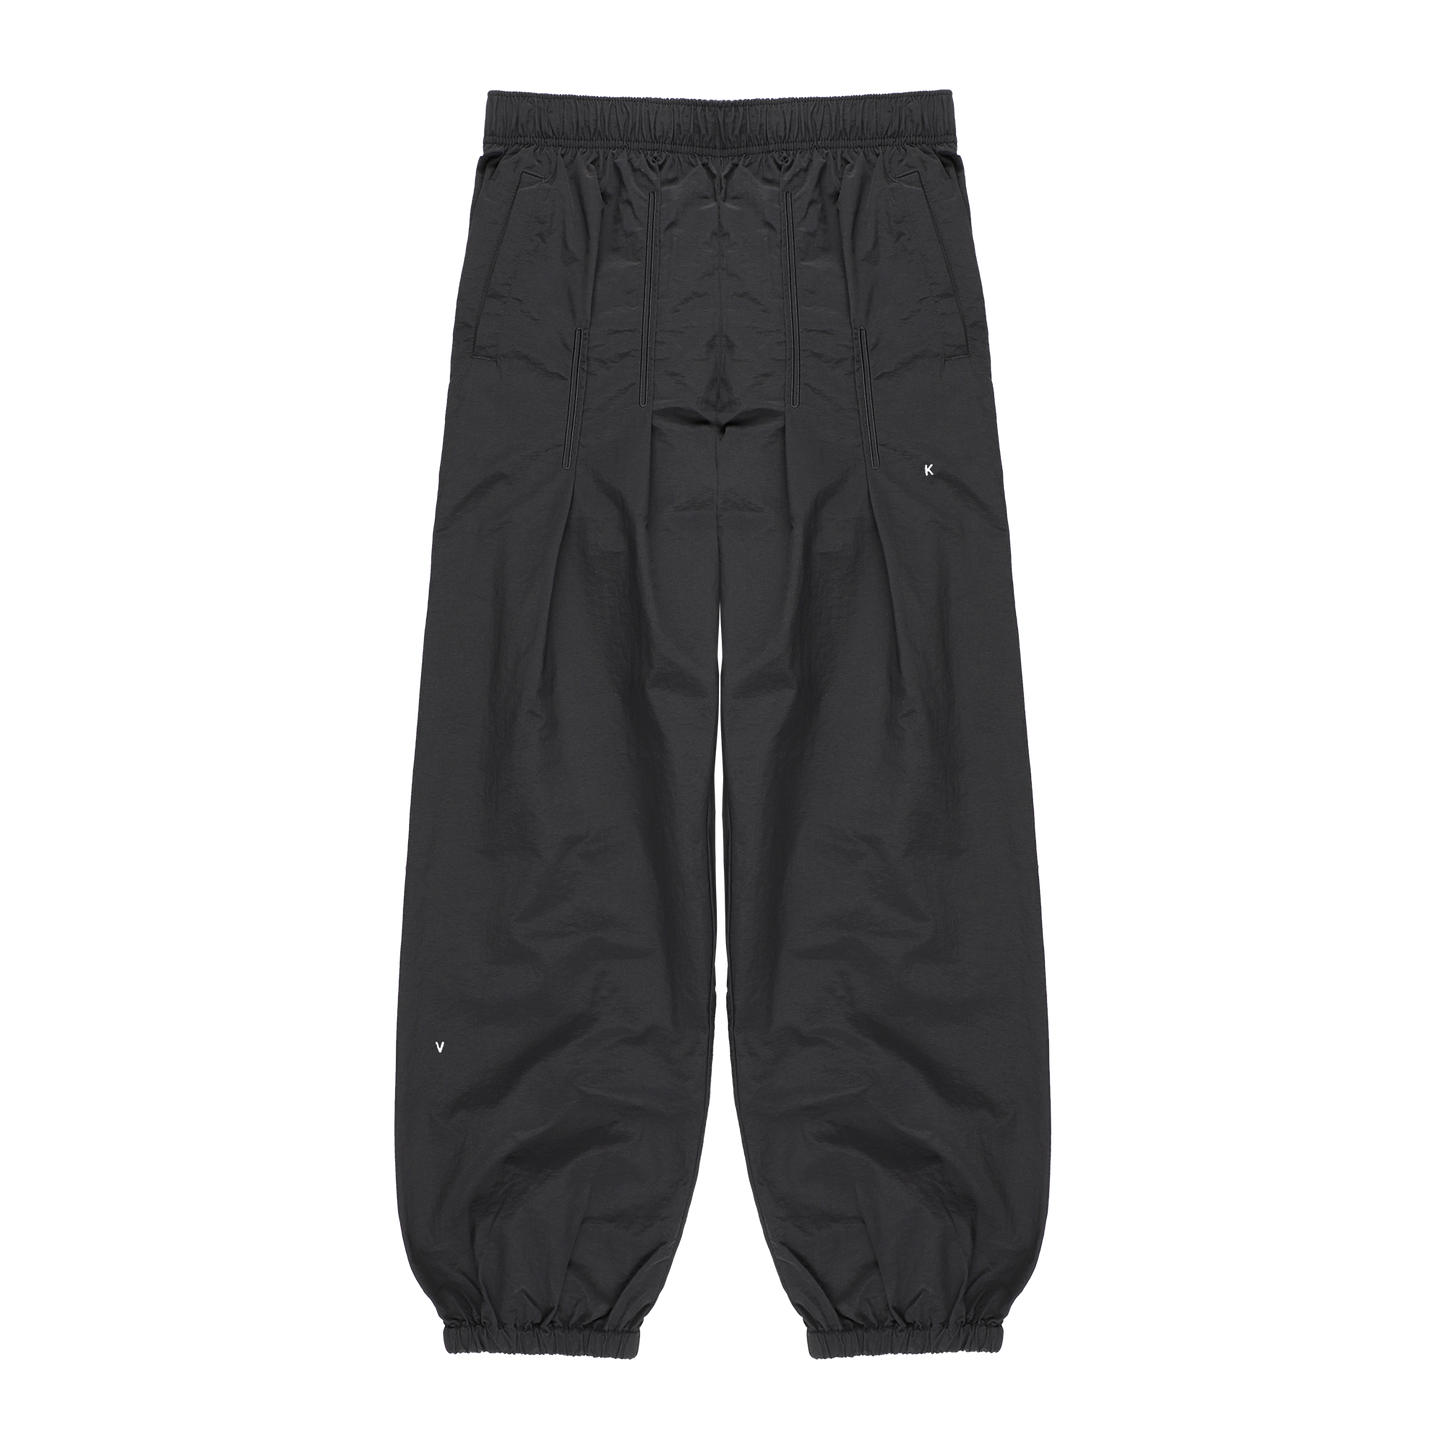 TRACK PANTS BLACK ( STUDY 7.02 : MULTIPLE EMBROIDERY) W/ LOGOS